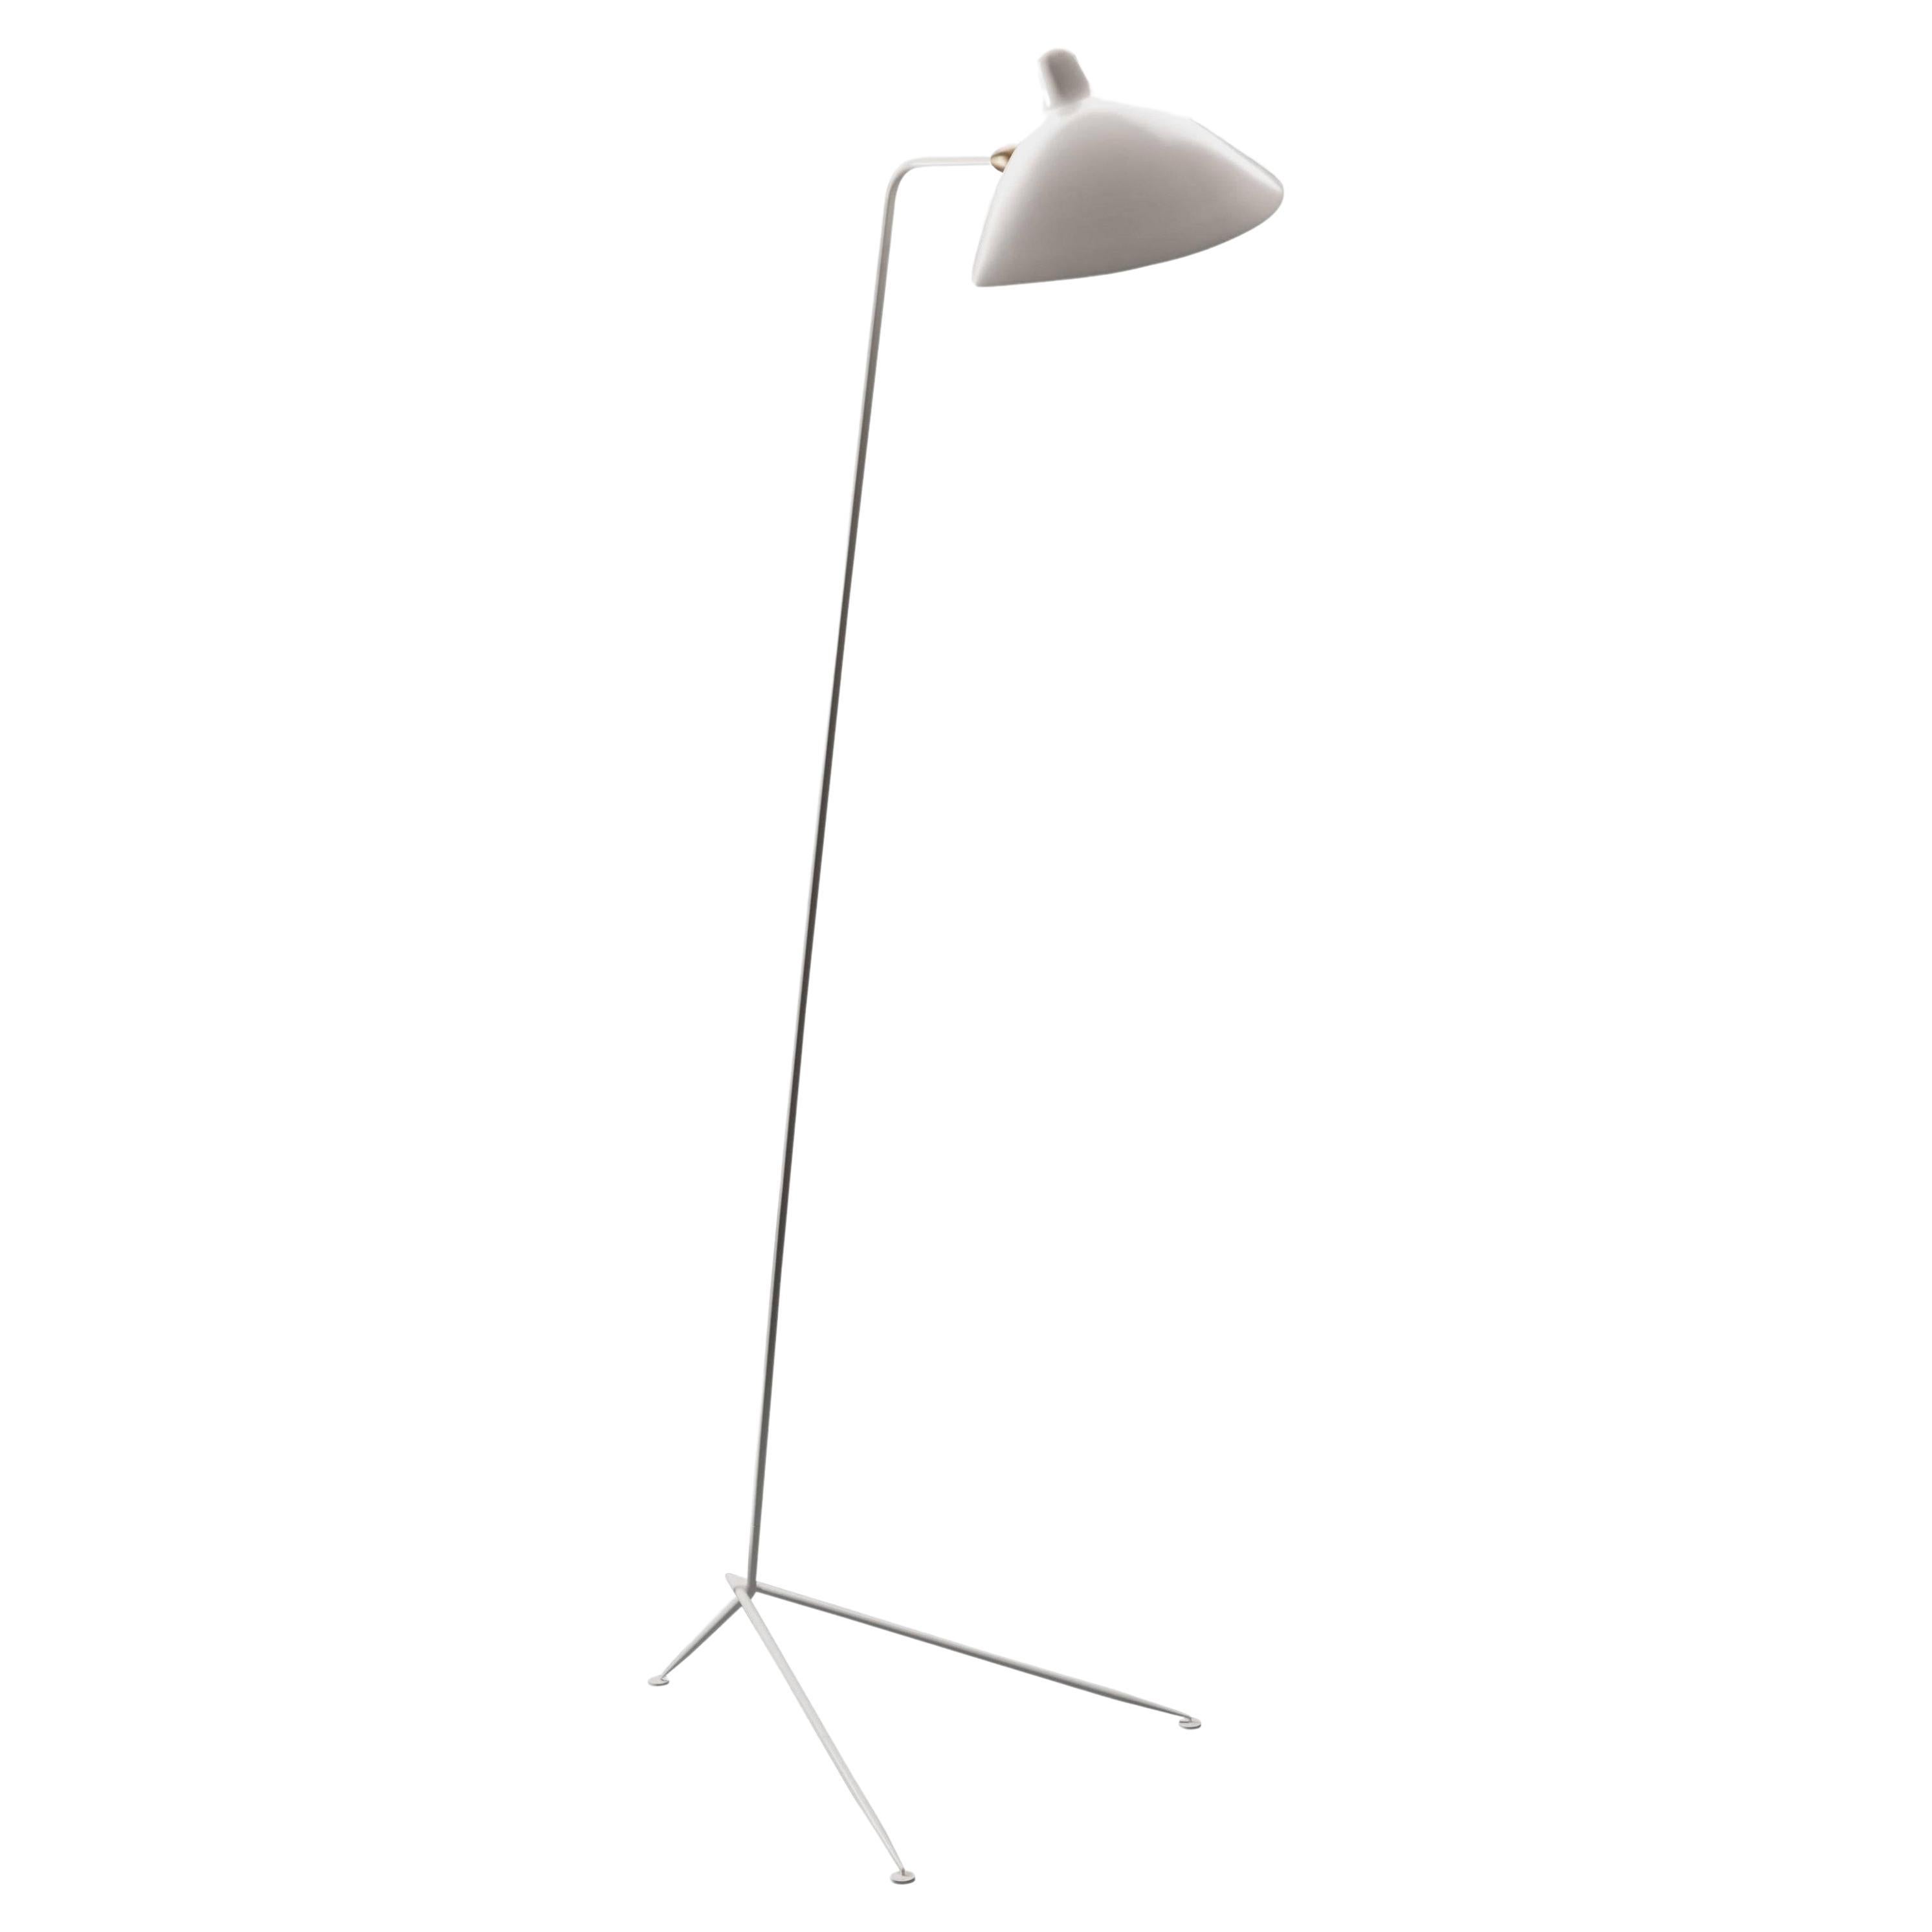 Editions Serge Mouille 'Lampadaire Droit' Floor Lamp in White For Sale